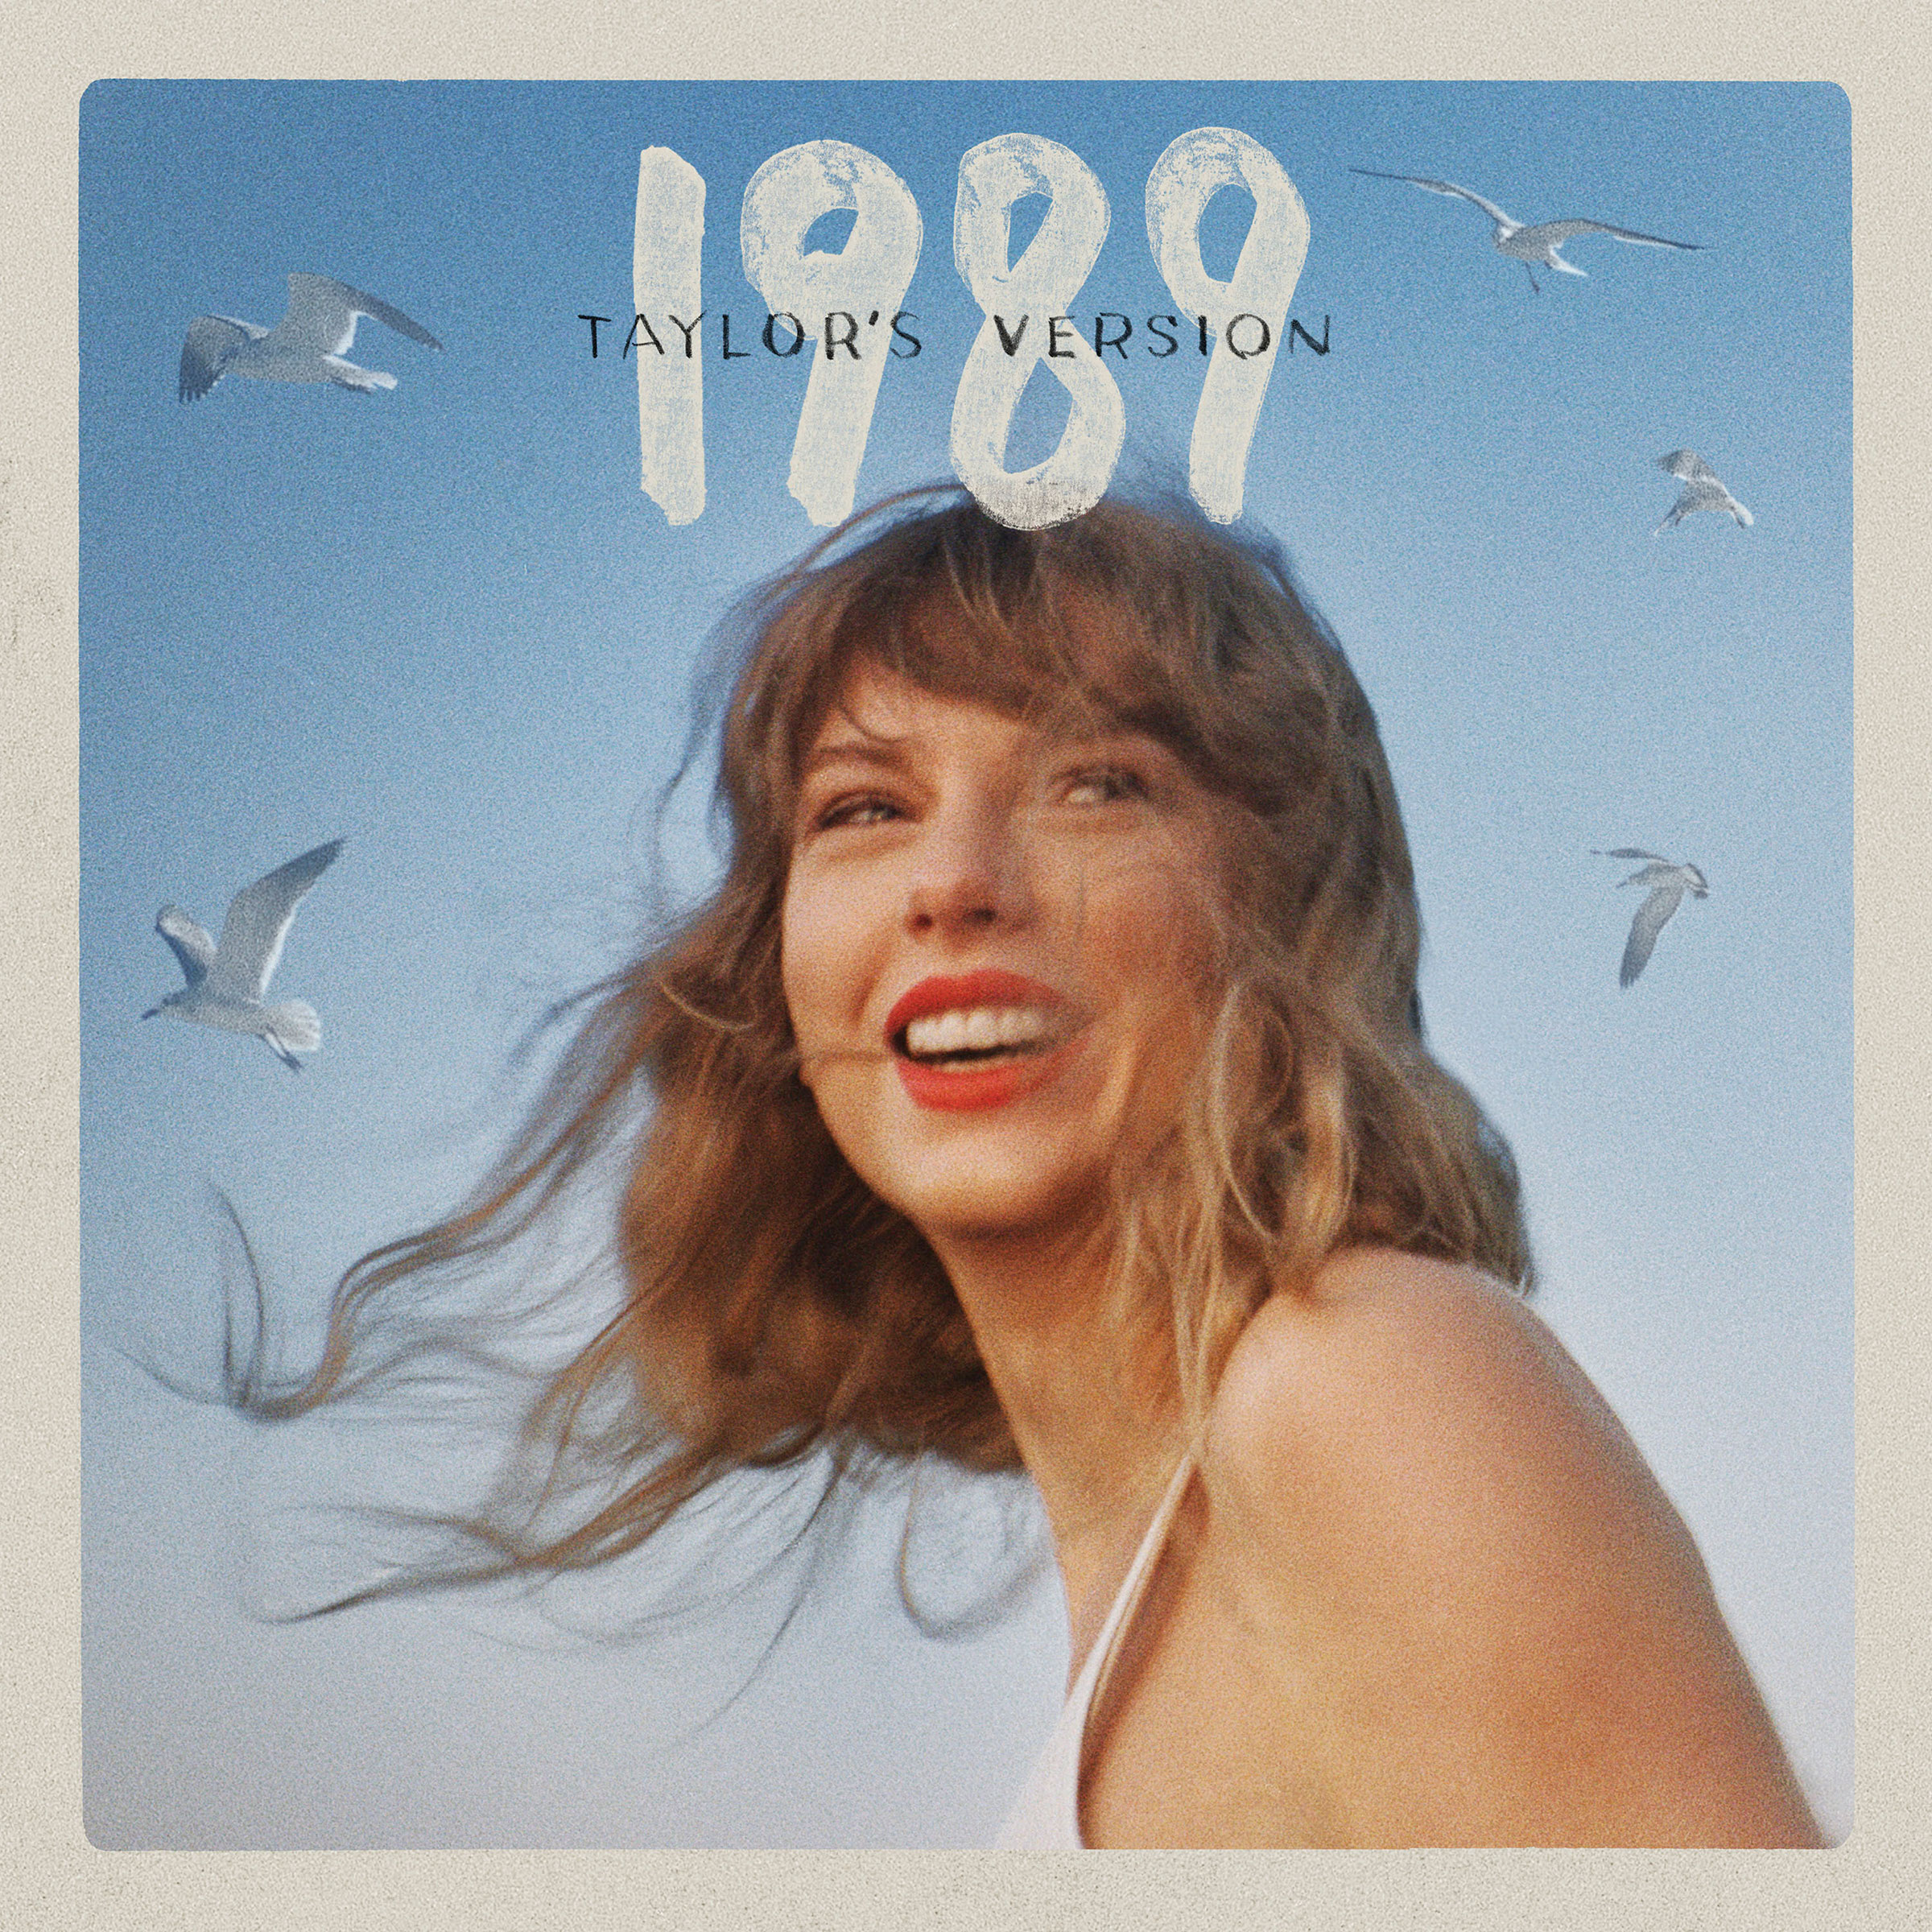 This cover image released by Republic Records shows "1989 (Taylor’s Version)" by Taylor Swift.